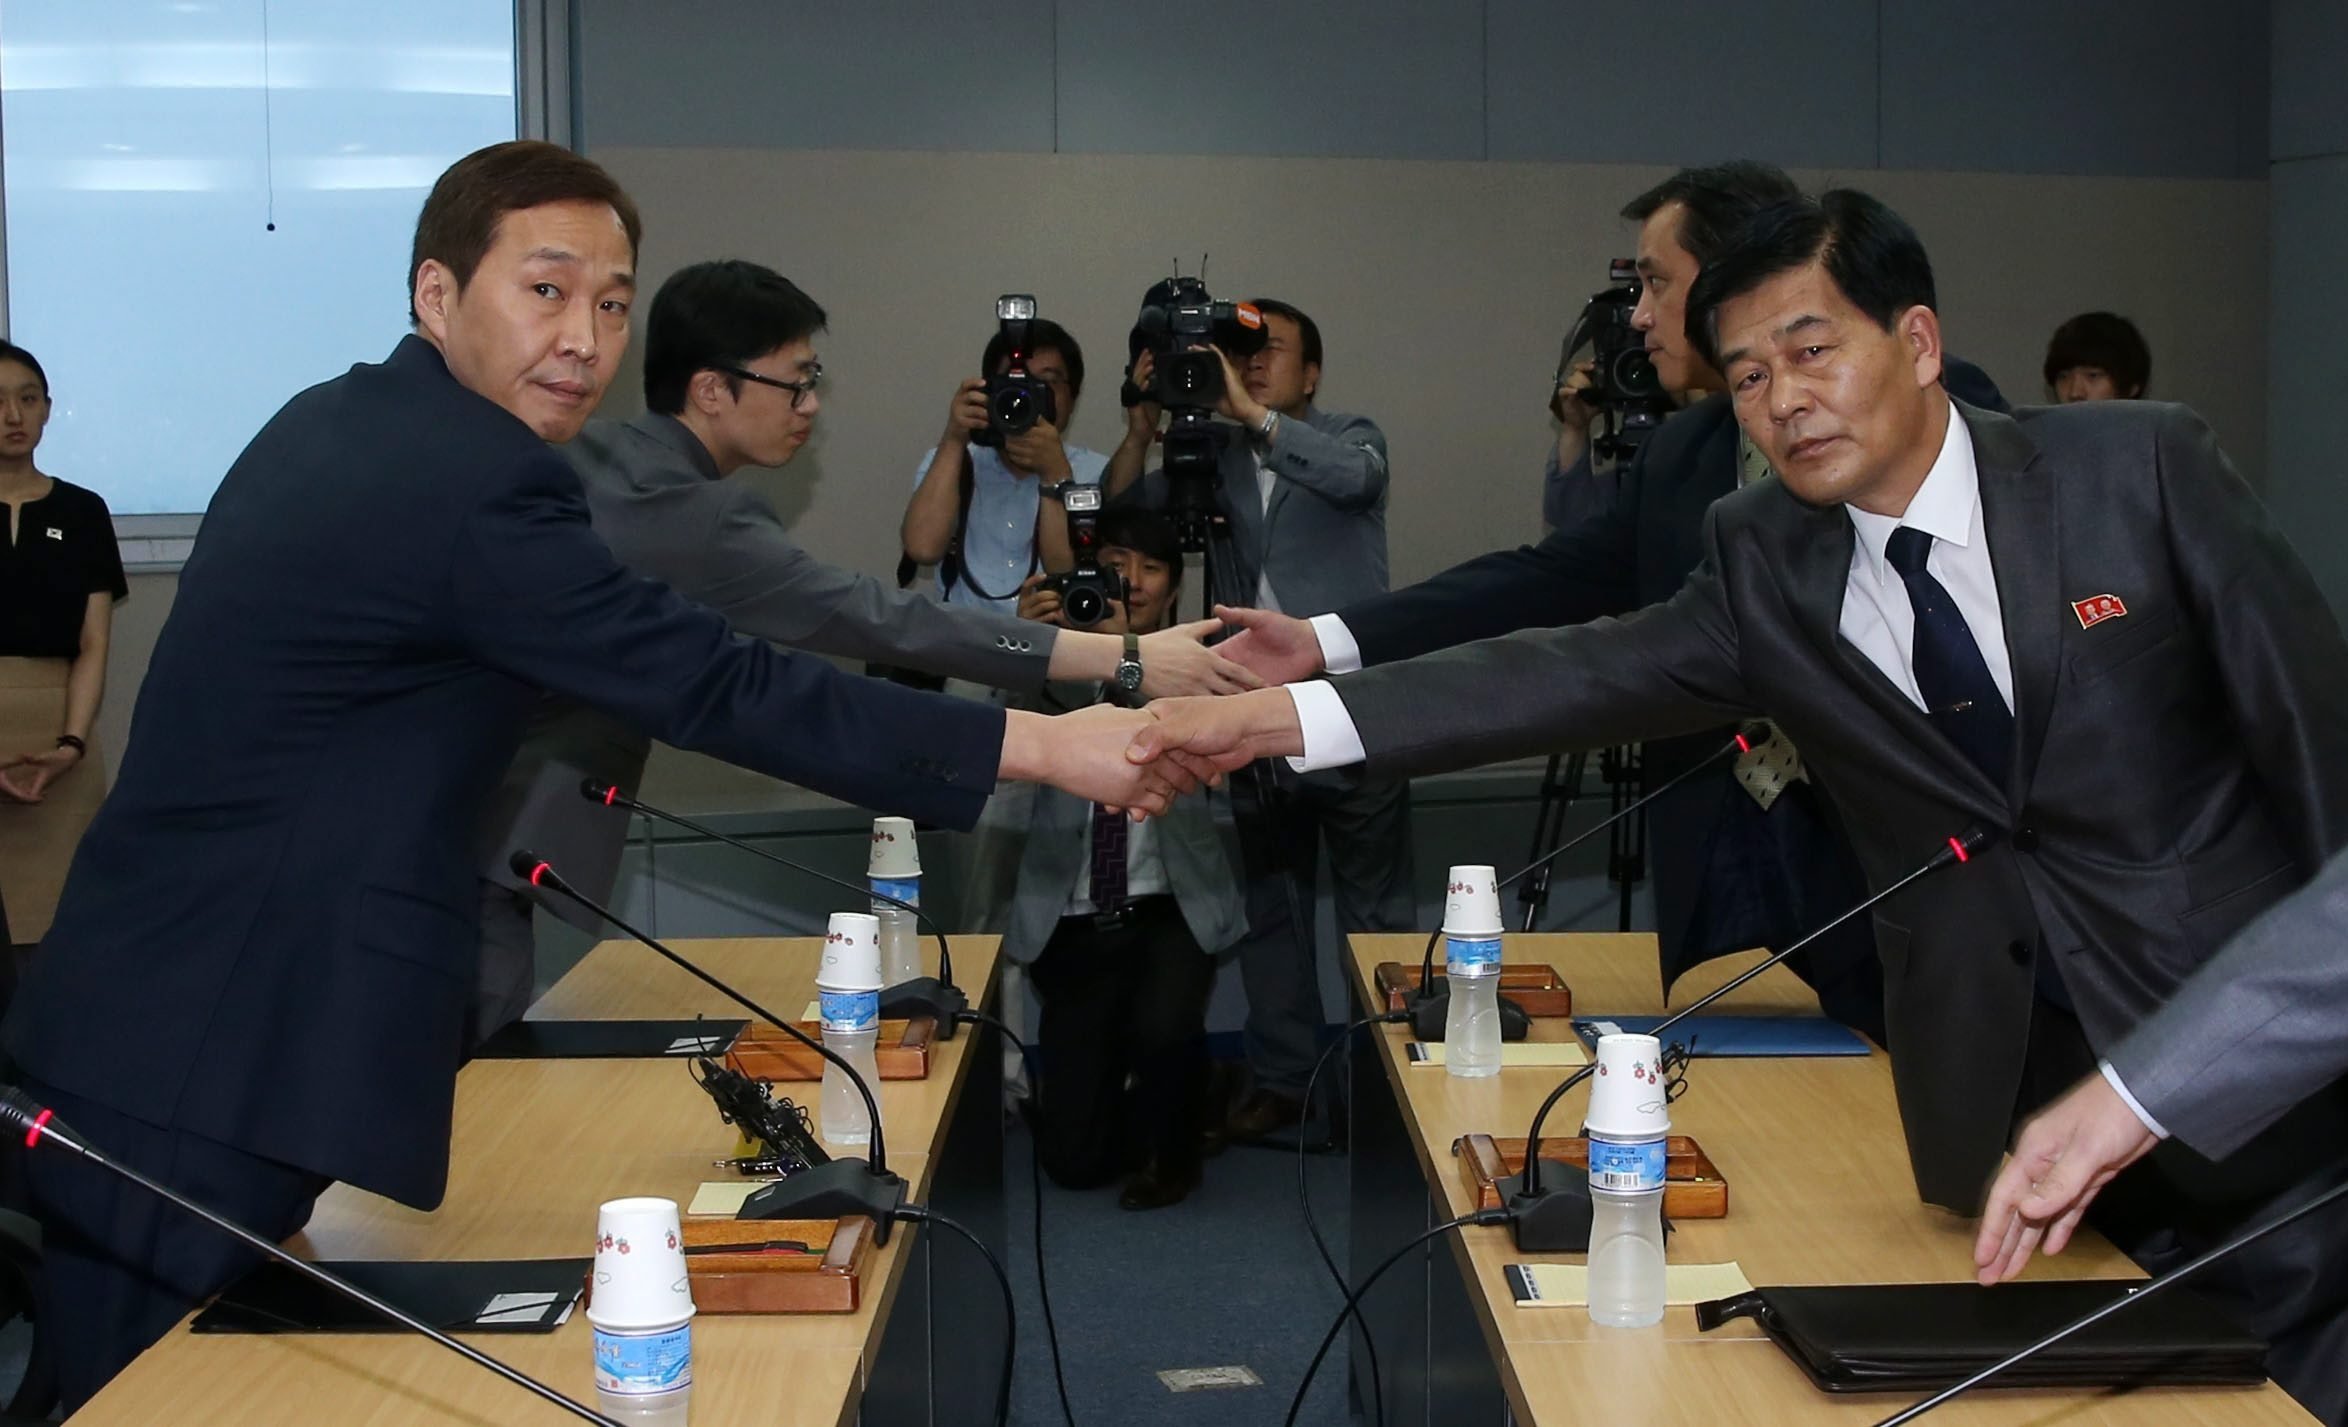 South Korean chief delegate Kim Ki-woong (left), a Ministry of Unification official, and his North Korean counterpart Park Chol-su shake hands prior to their fifth round of working-level talks on the normalisation of the suspended Kaesong industrial complex in Kaesong, North Korea. Photo: EPA